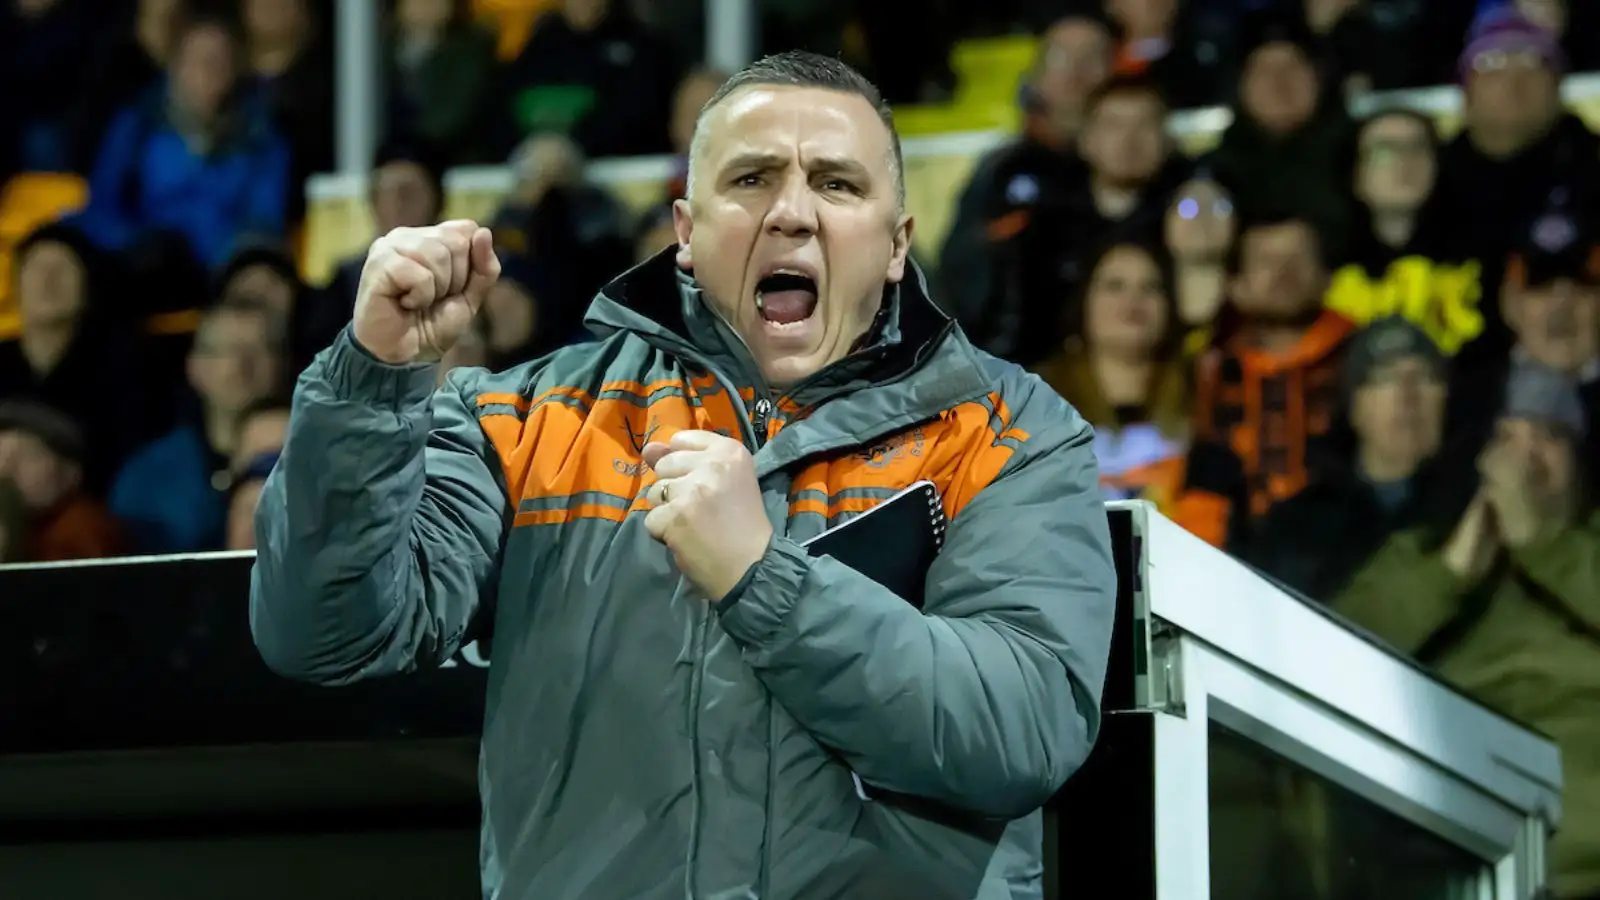 New Castleford coach looking to add creativity to his squad